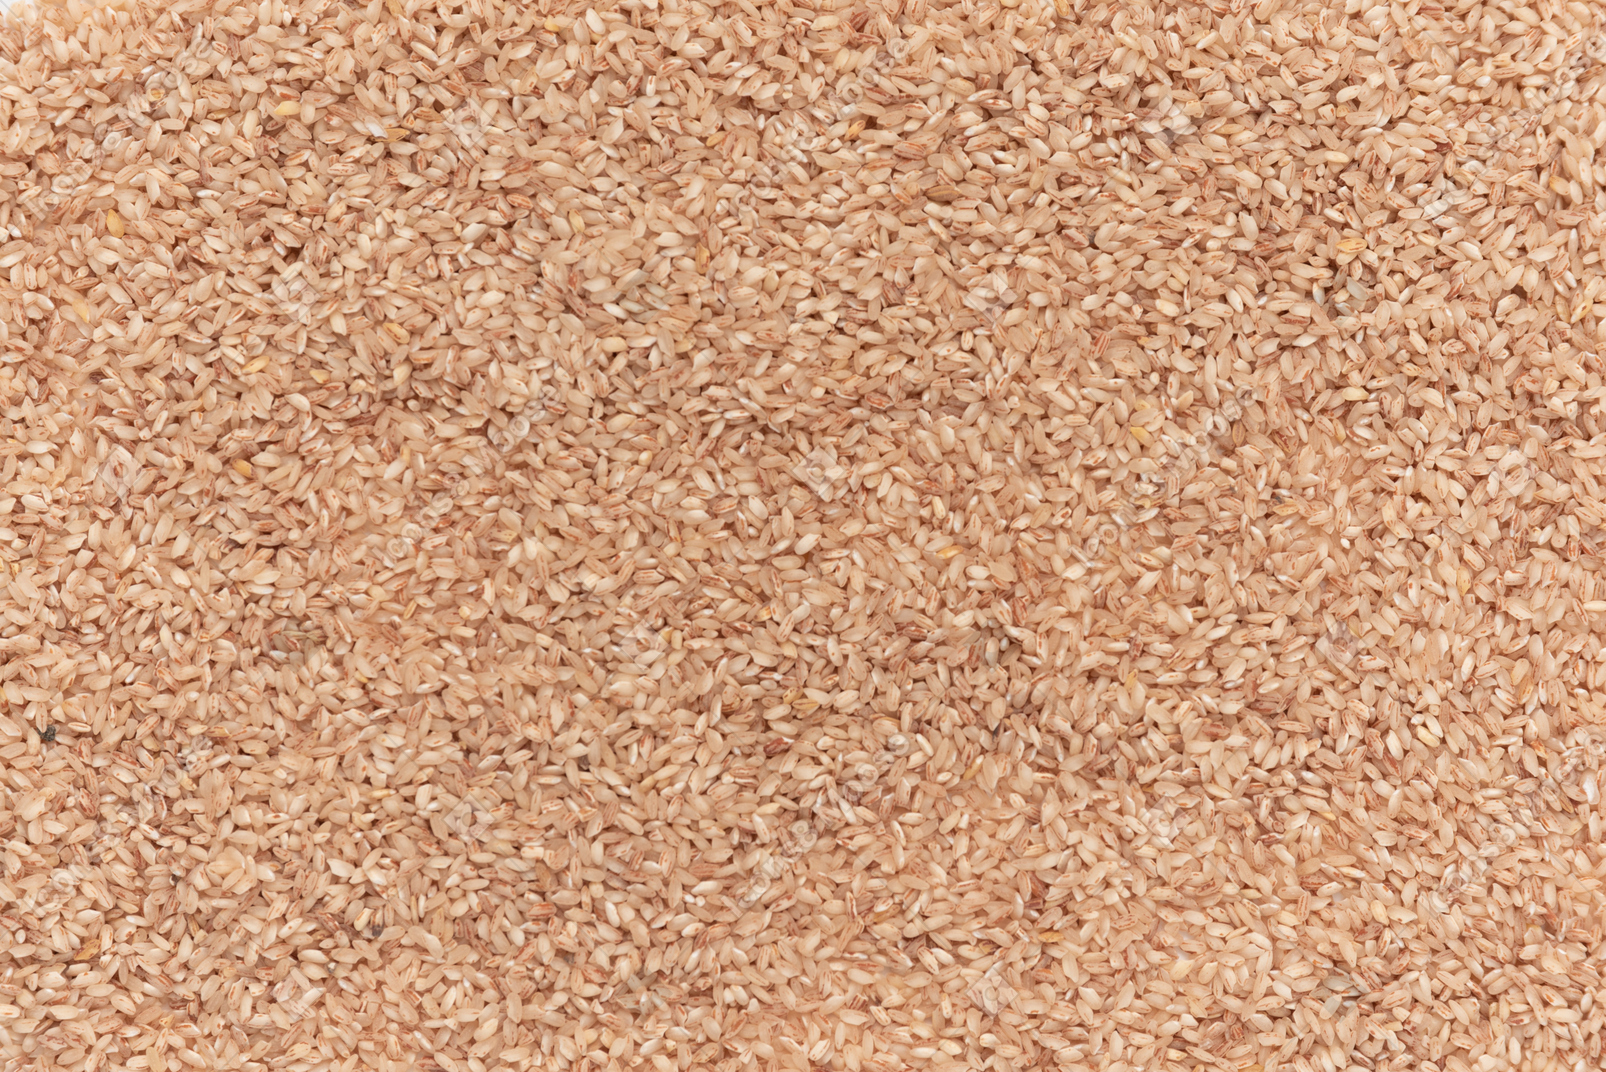 Background of brown seeds